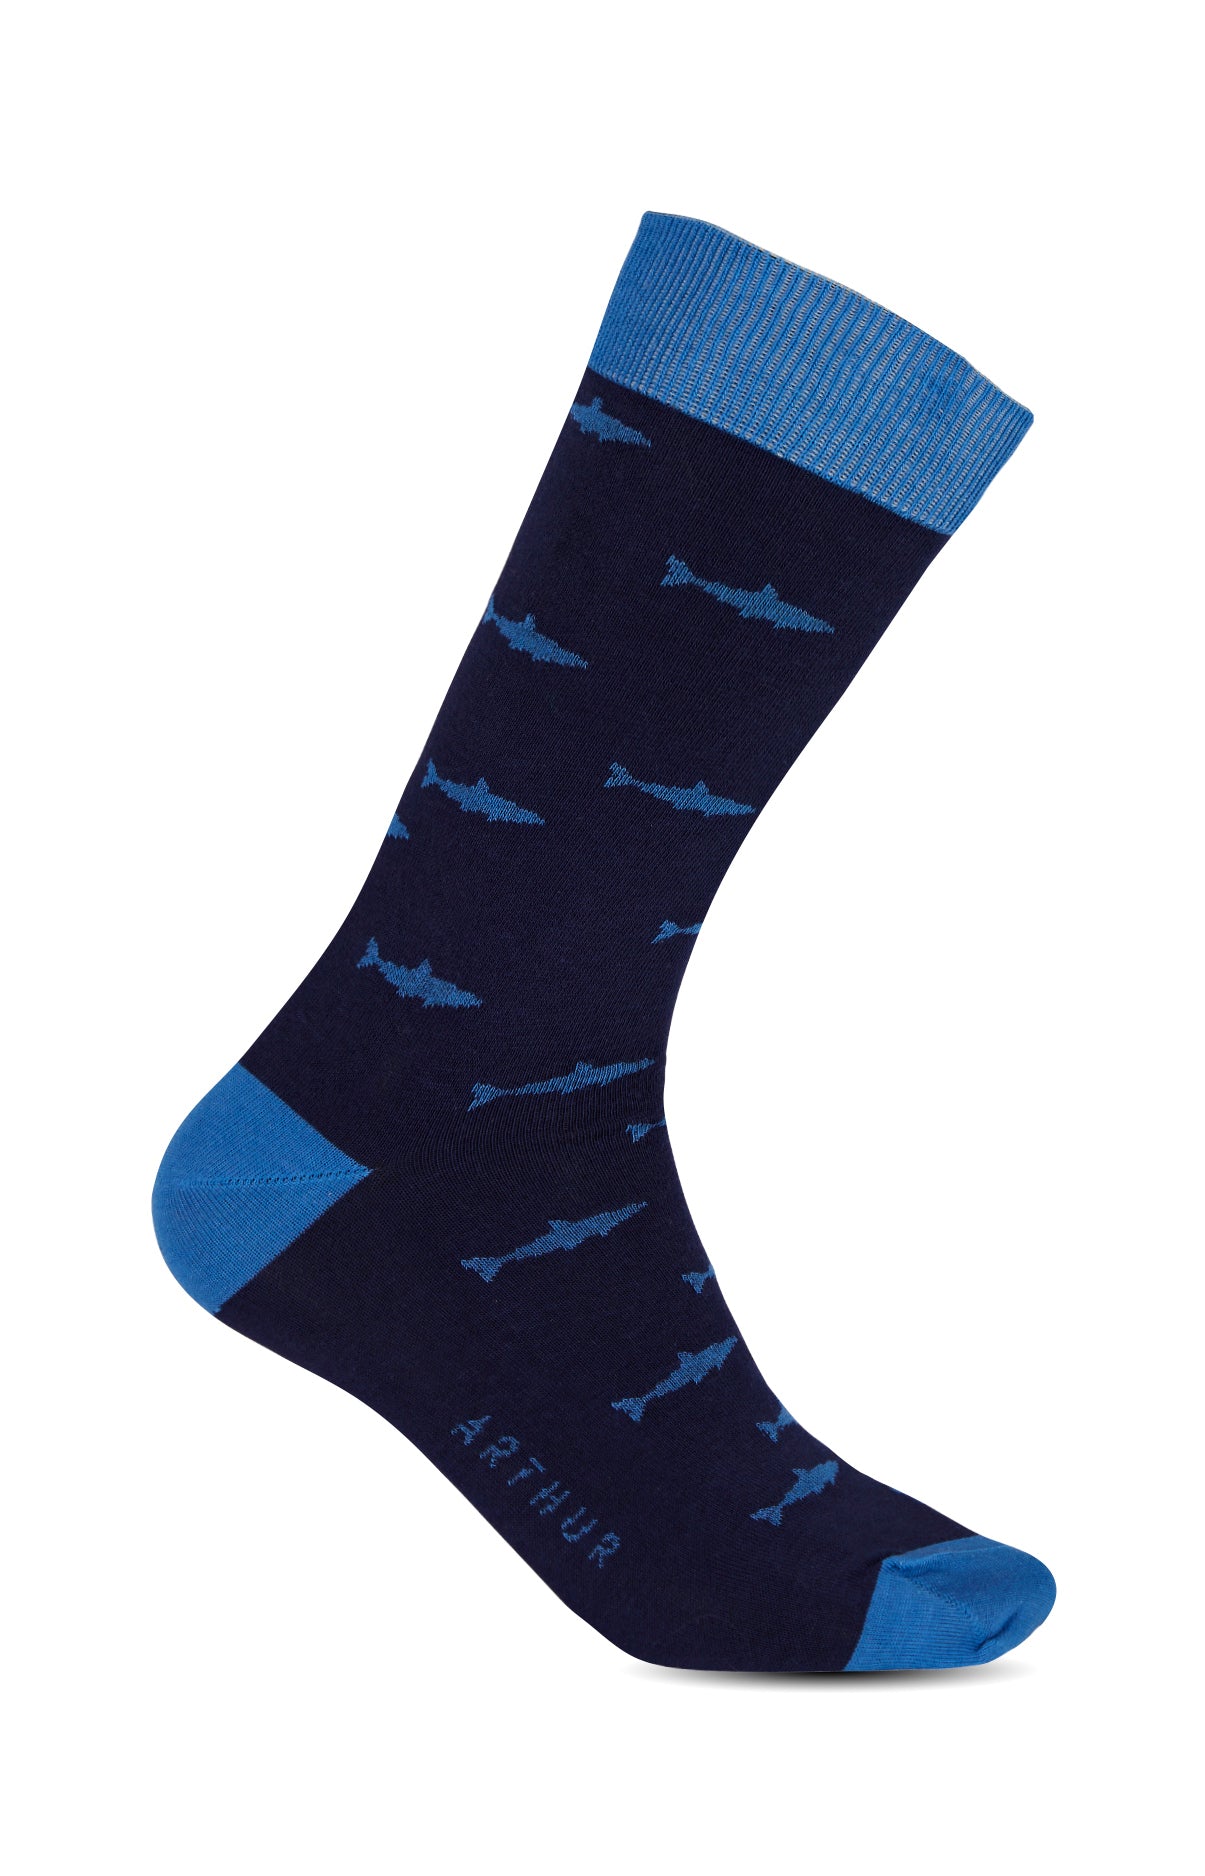 Chaussettes Requin Marine